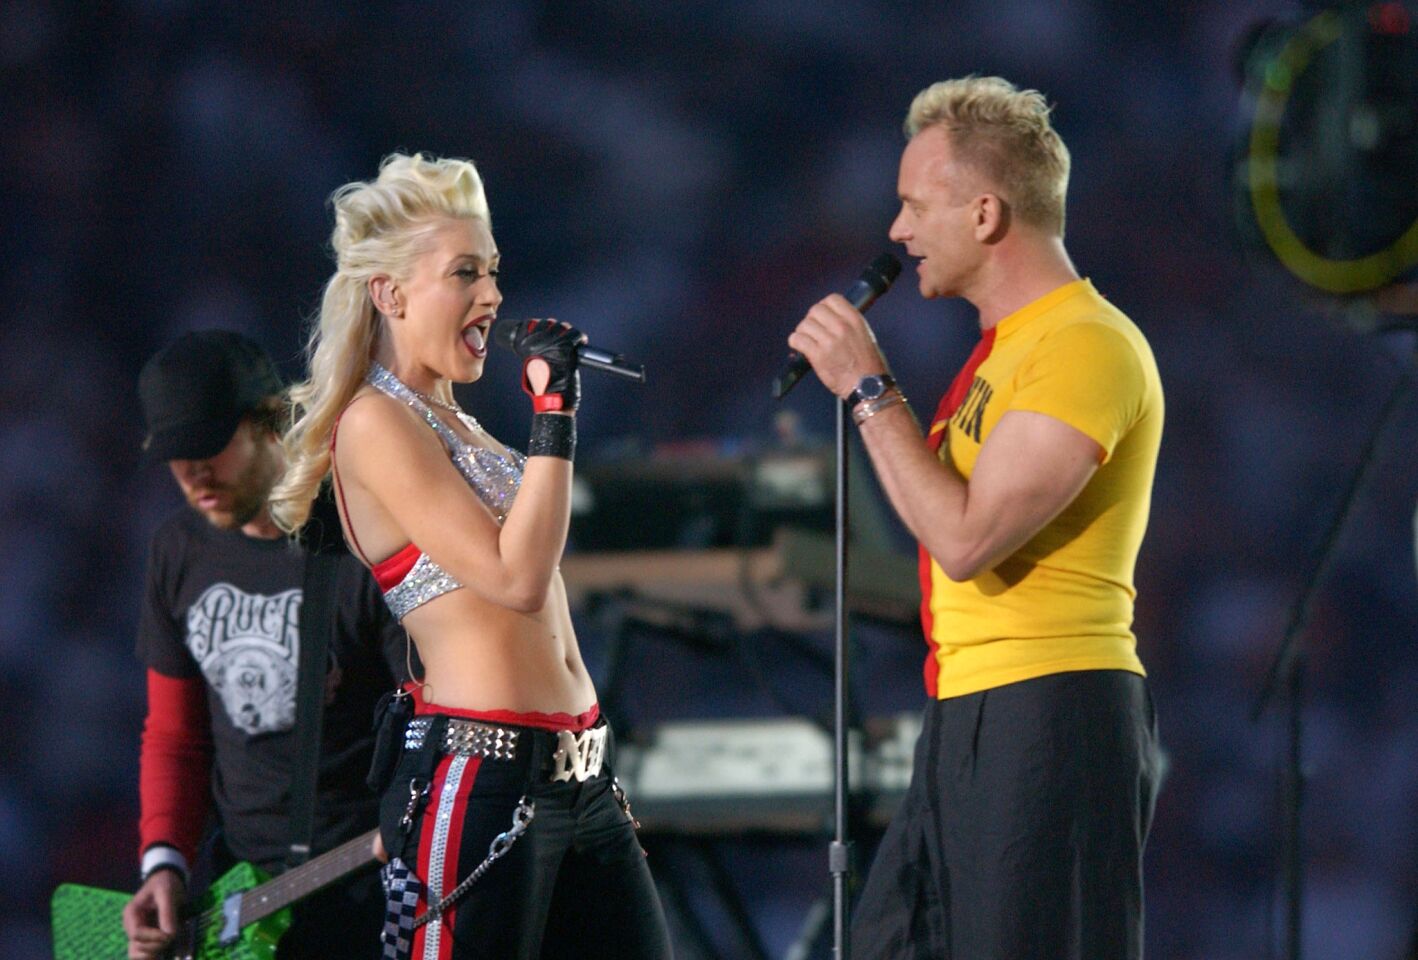 Twain's performance proved hollow when she unconvincingly lip-synched her way through "Man! I Feel Like a Woman!" Gwen Stefani saved the show by doing what she does best, super-charging a SoCal crowd in a stadium setting through sheer force of ska-sonality, finishing with a duet with Sting.